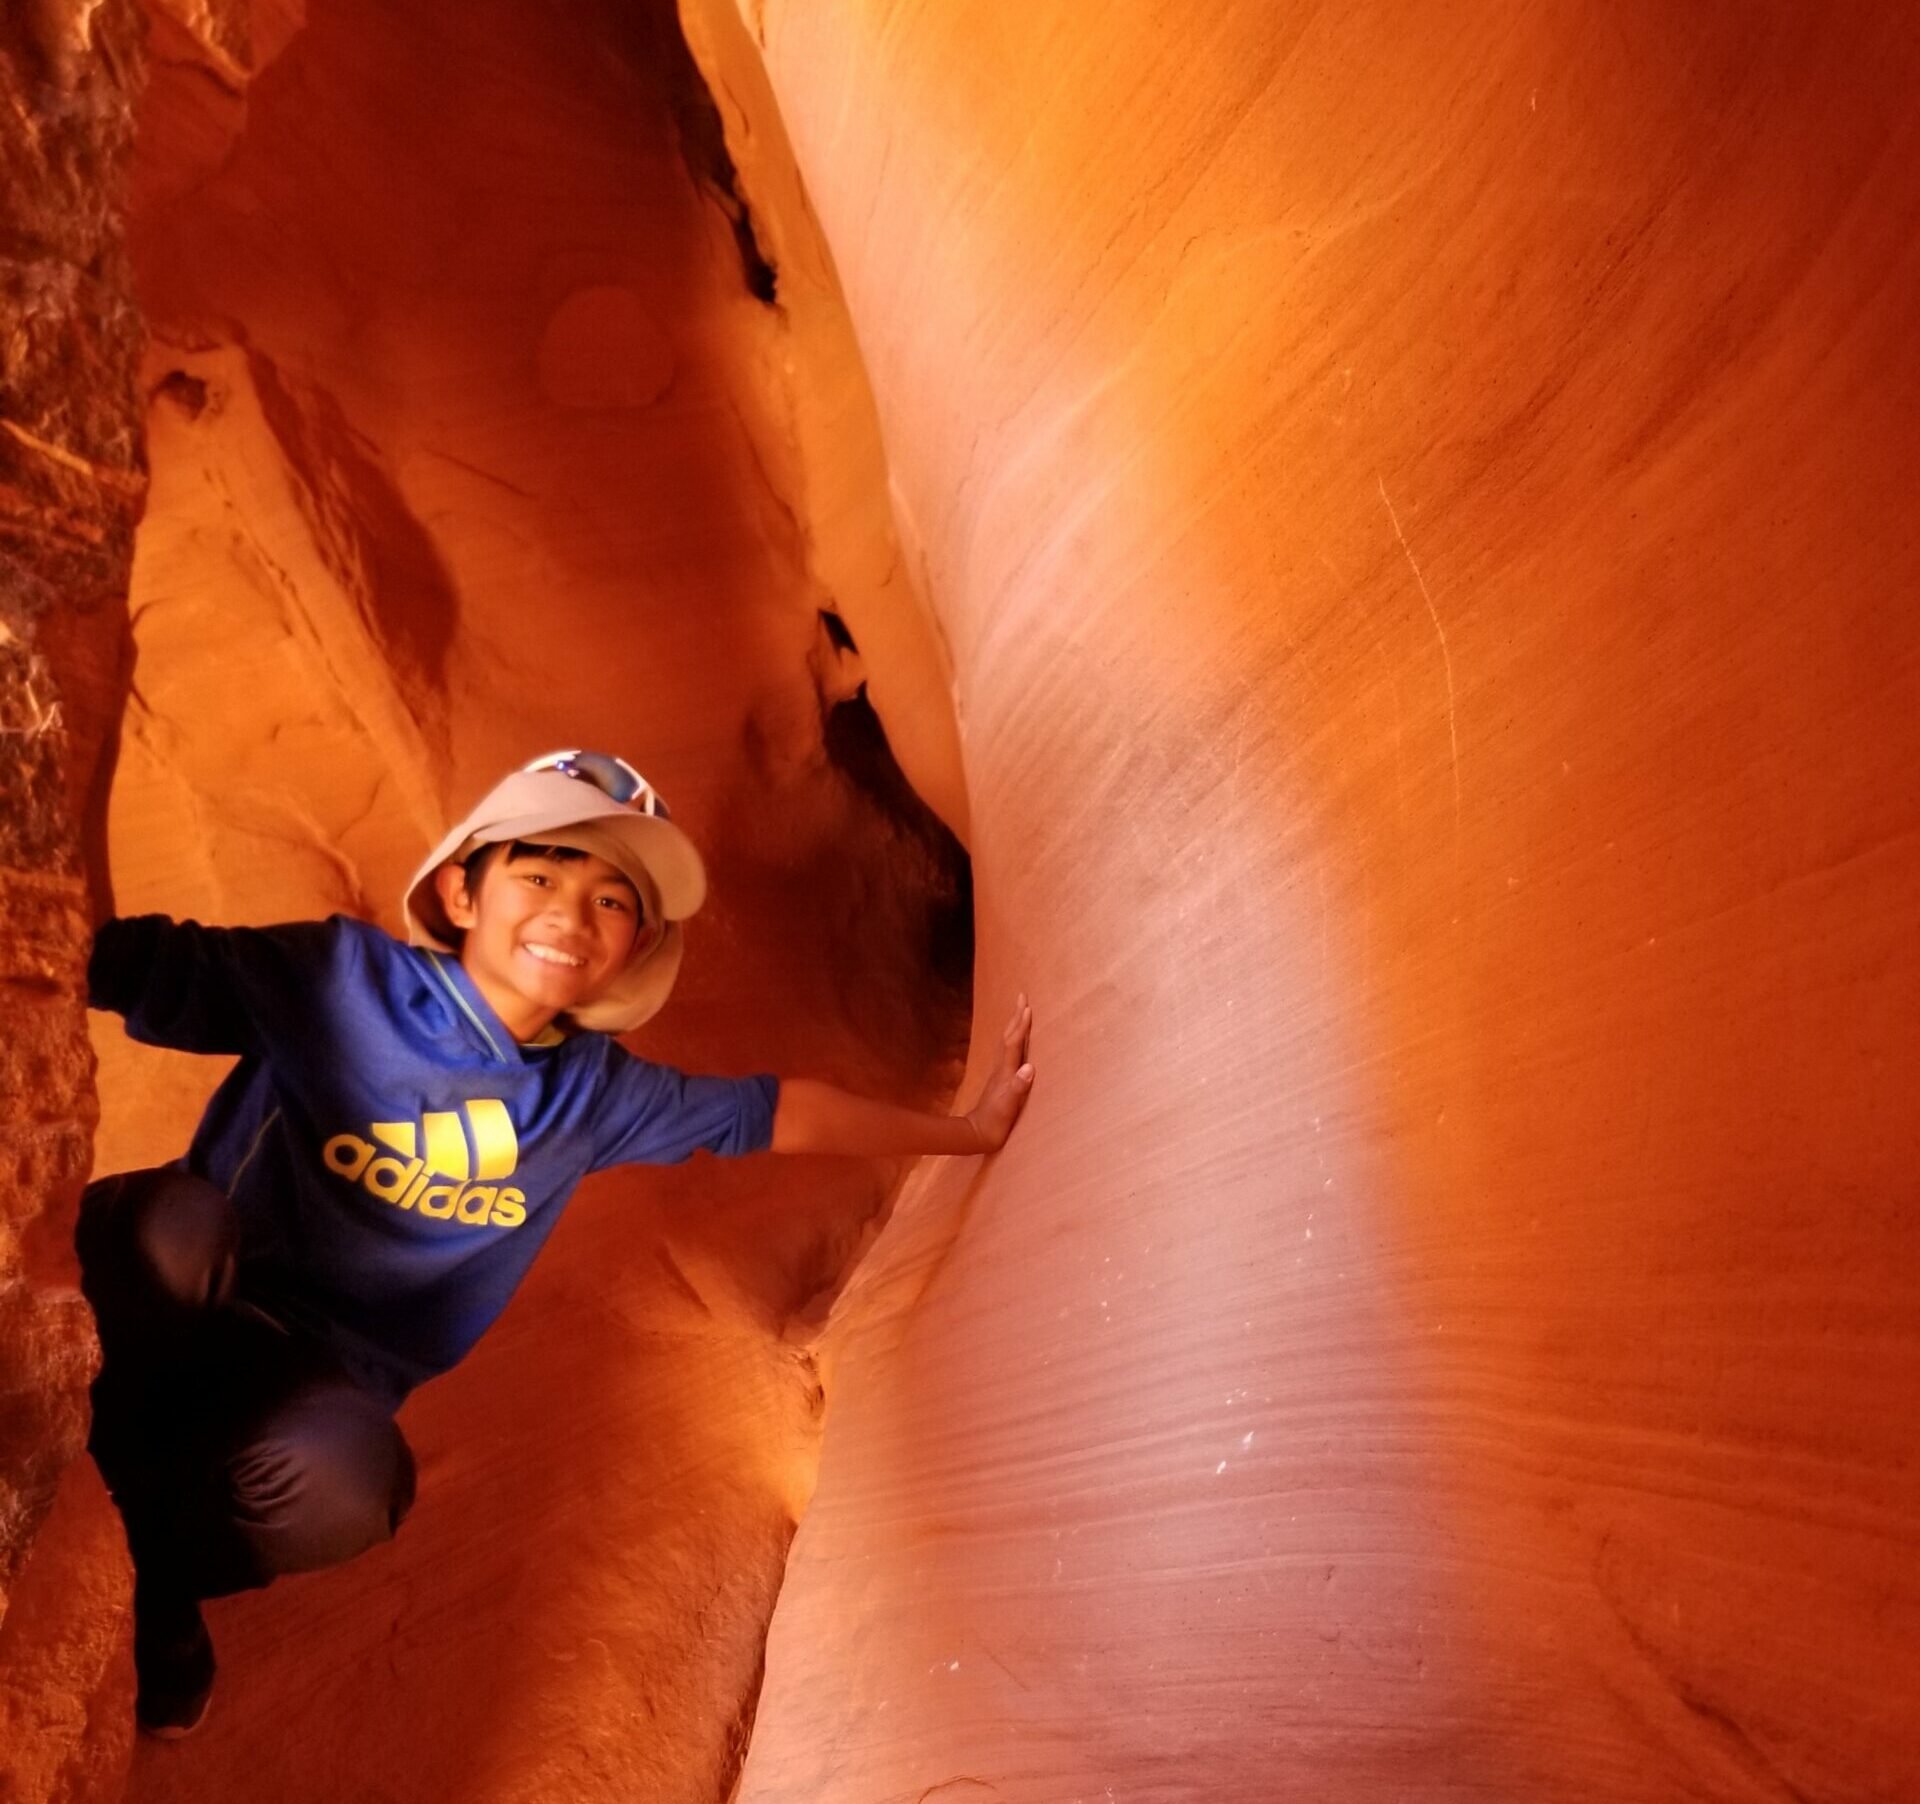 Youth on Course member Jaden Nacional at The Valley of Fire State Park in Las Vegas, NV